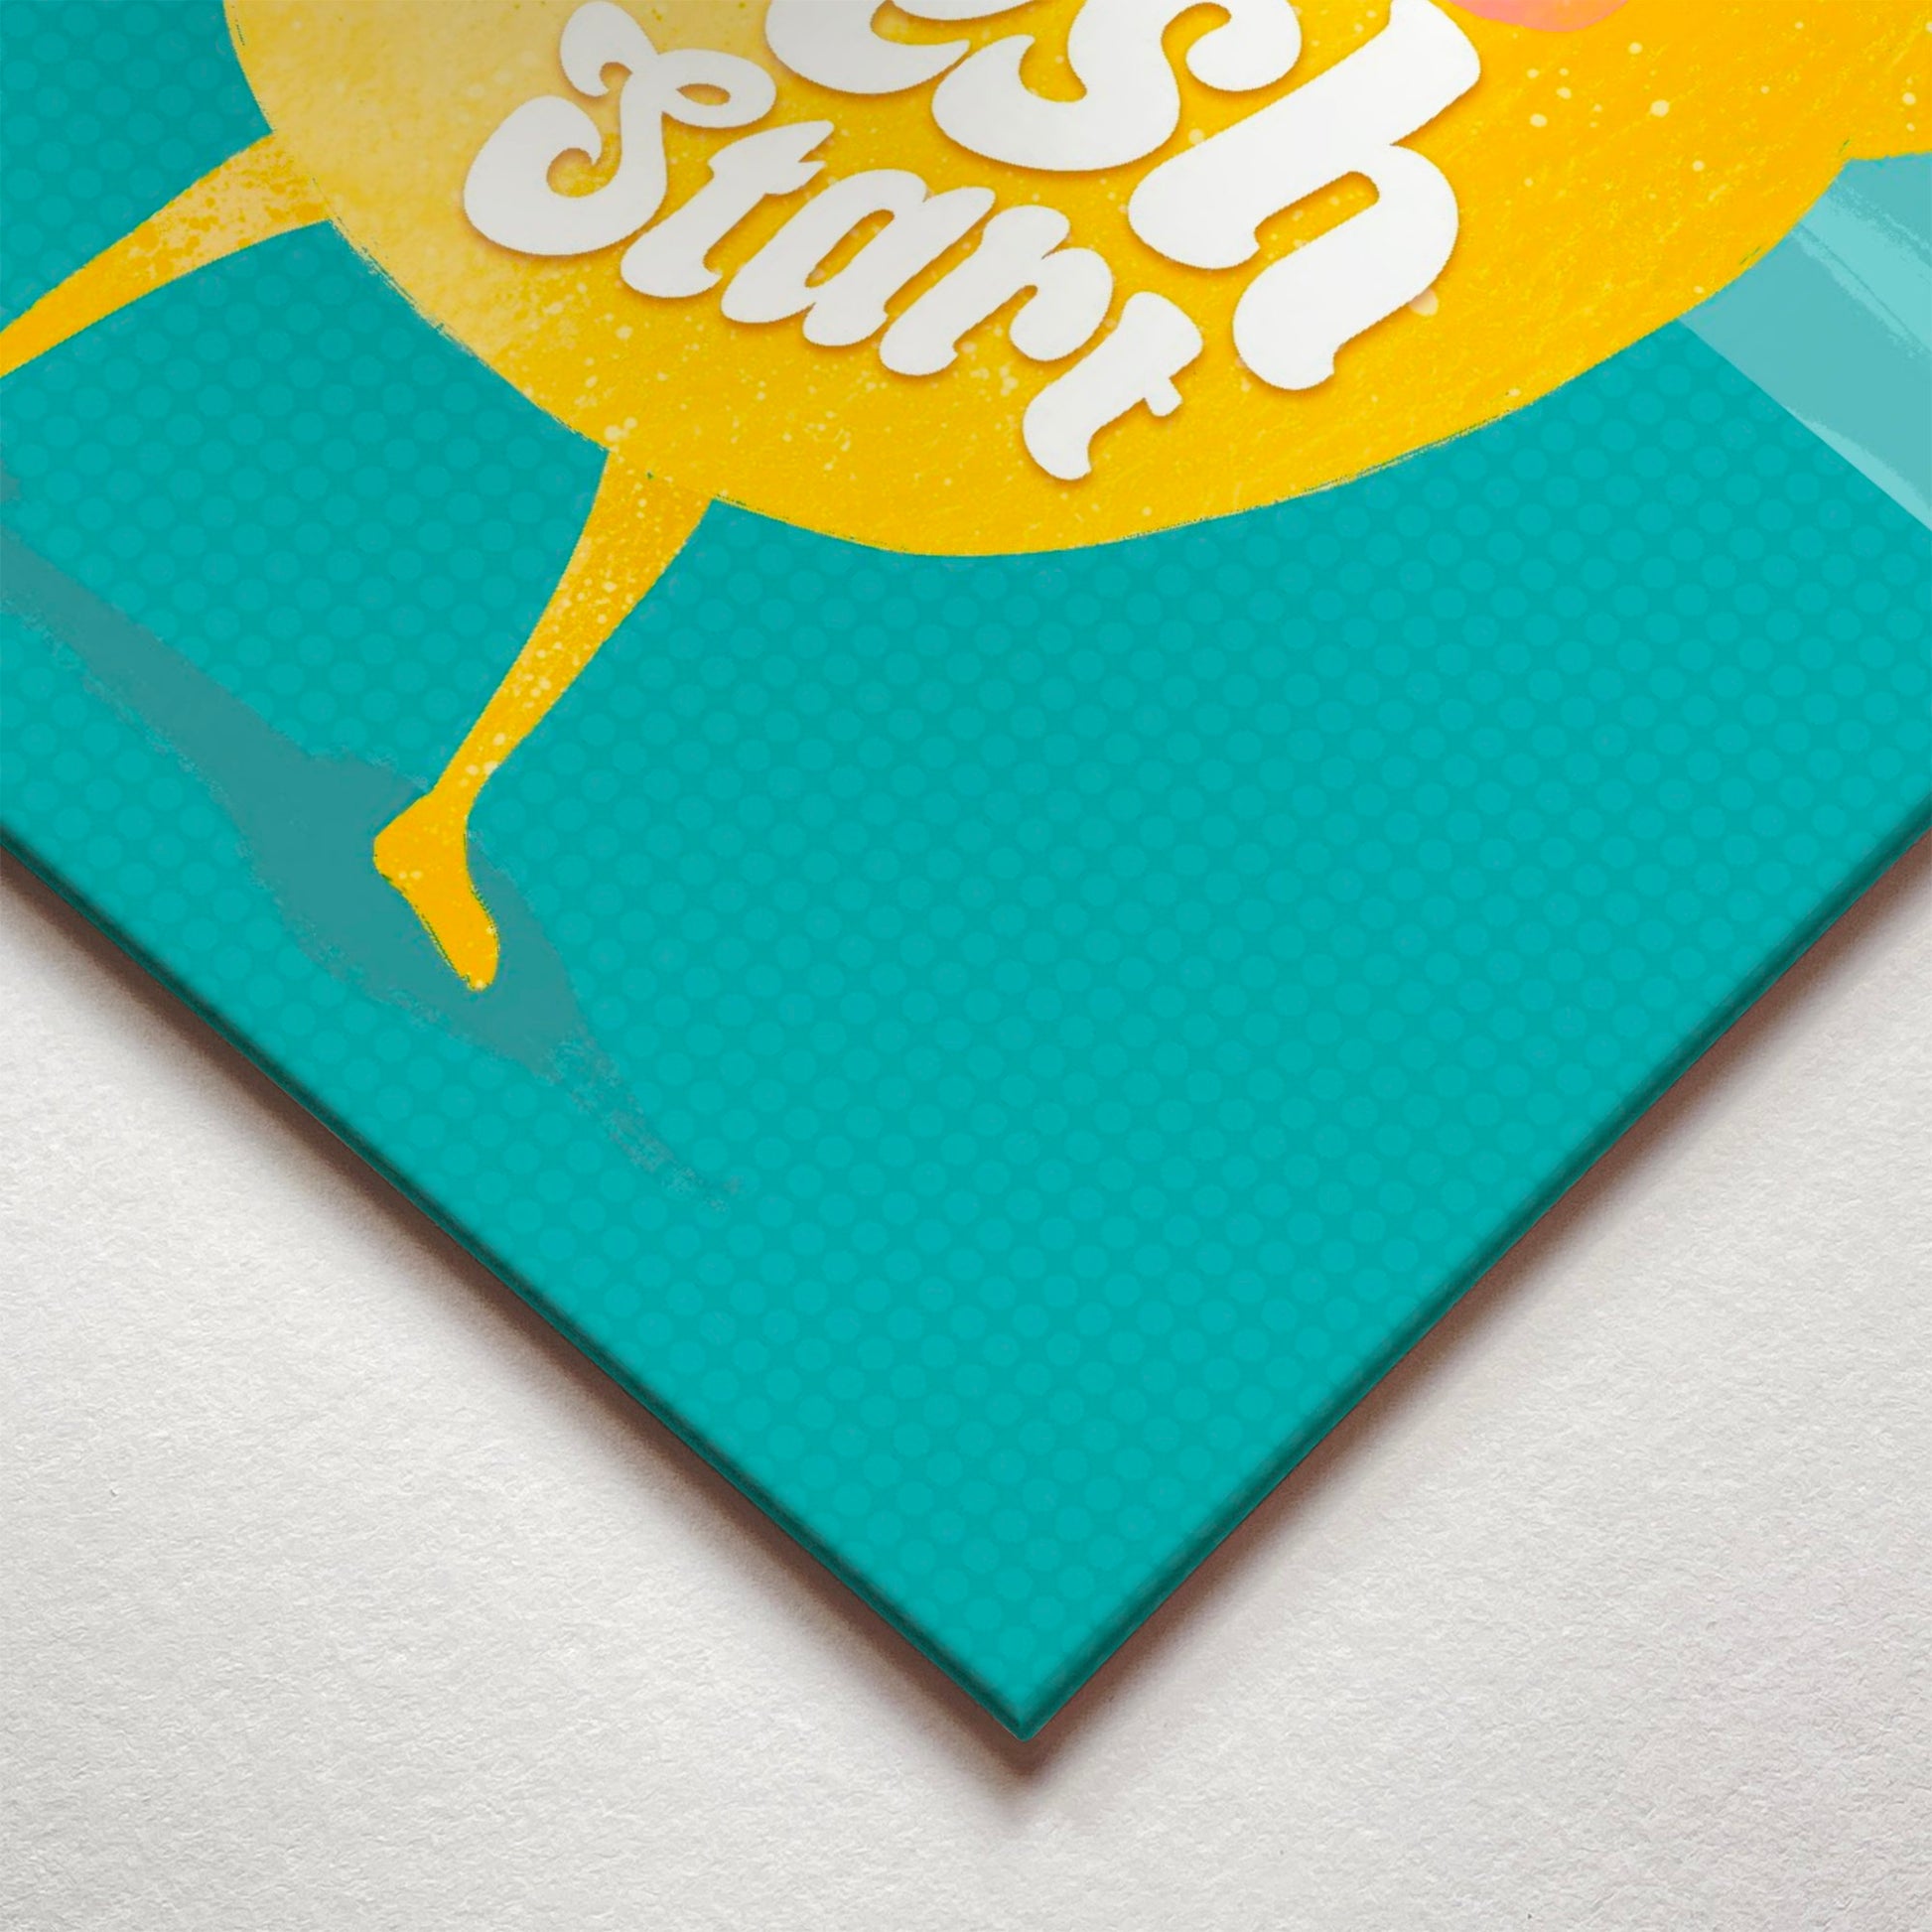 A closeup corner detail view of a metal art poster display plate with printed design of a Cute Lemon Quote 'Today is a Fresh Start'